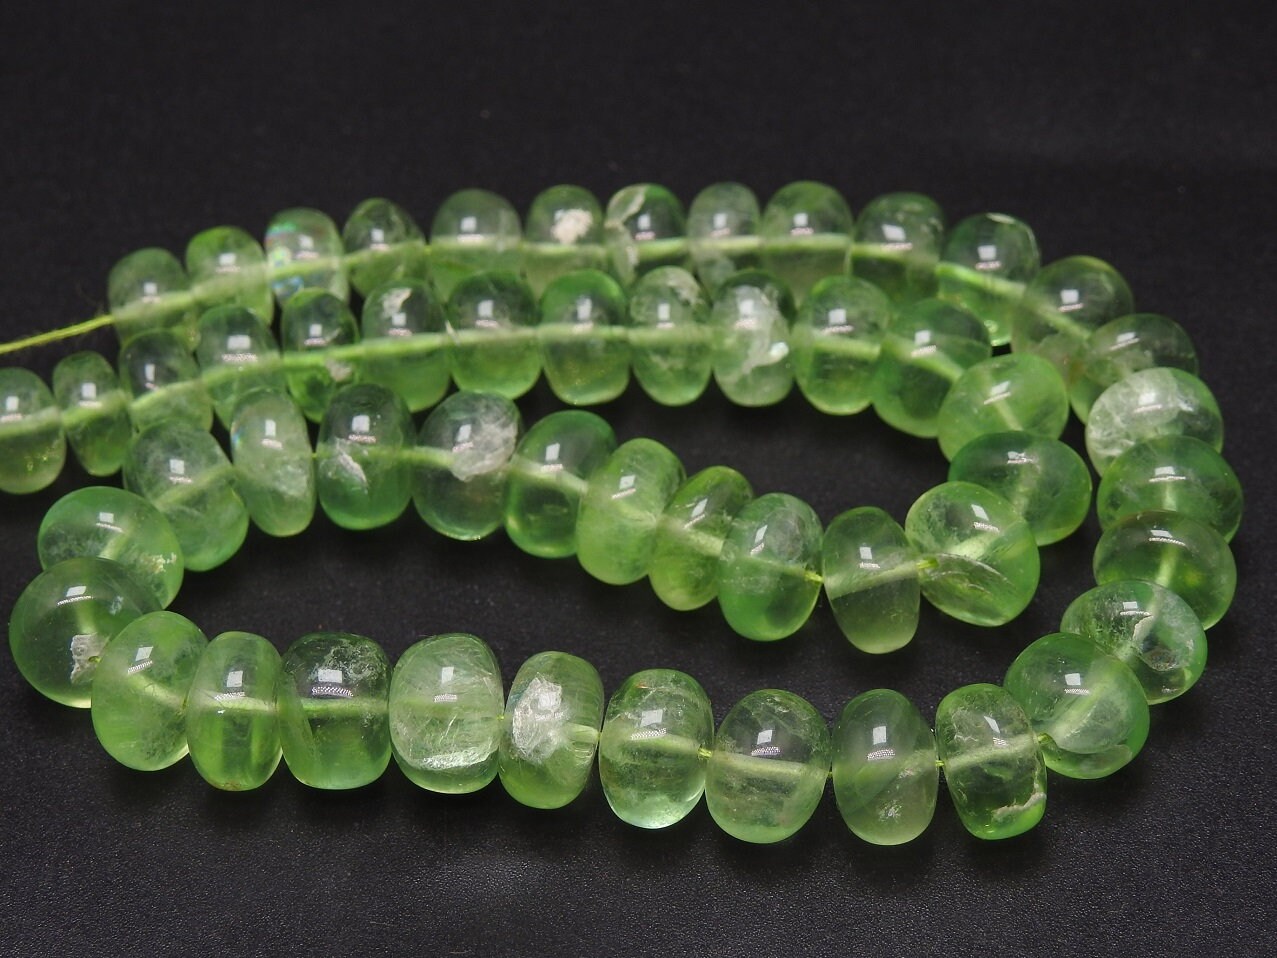 Green Fluorite Smooth Roundel Beads,Loose Stone,Handmade,Necklace,For Making Jewelry,Wholesaler,Supplies,New Arrivals 100%Natural (pme)B4 | Save 33% - Rajasthan Living 13